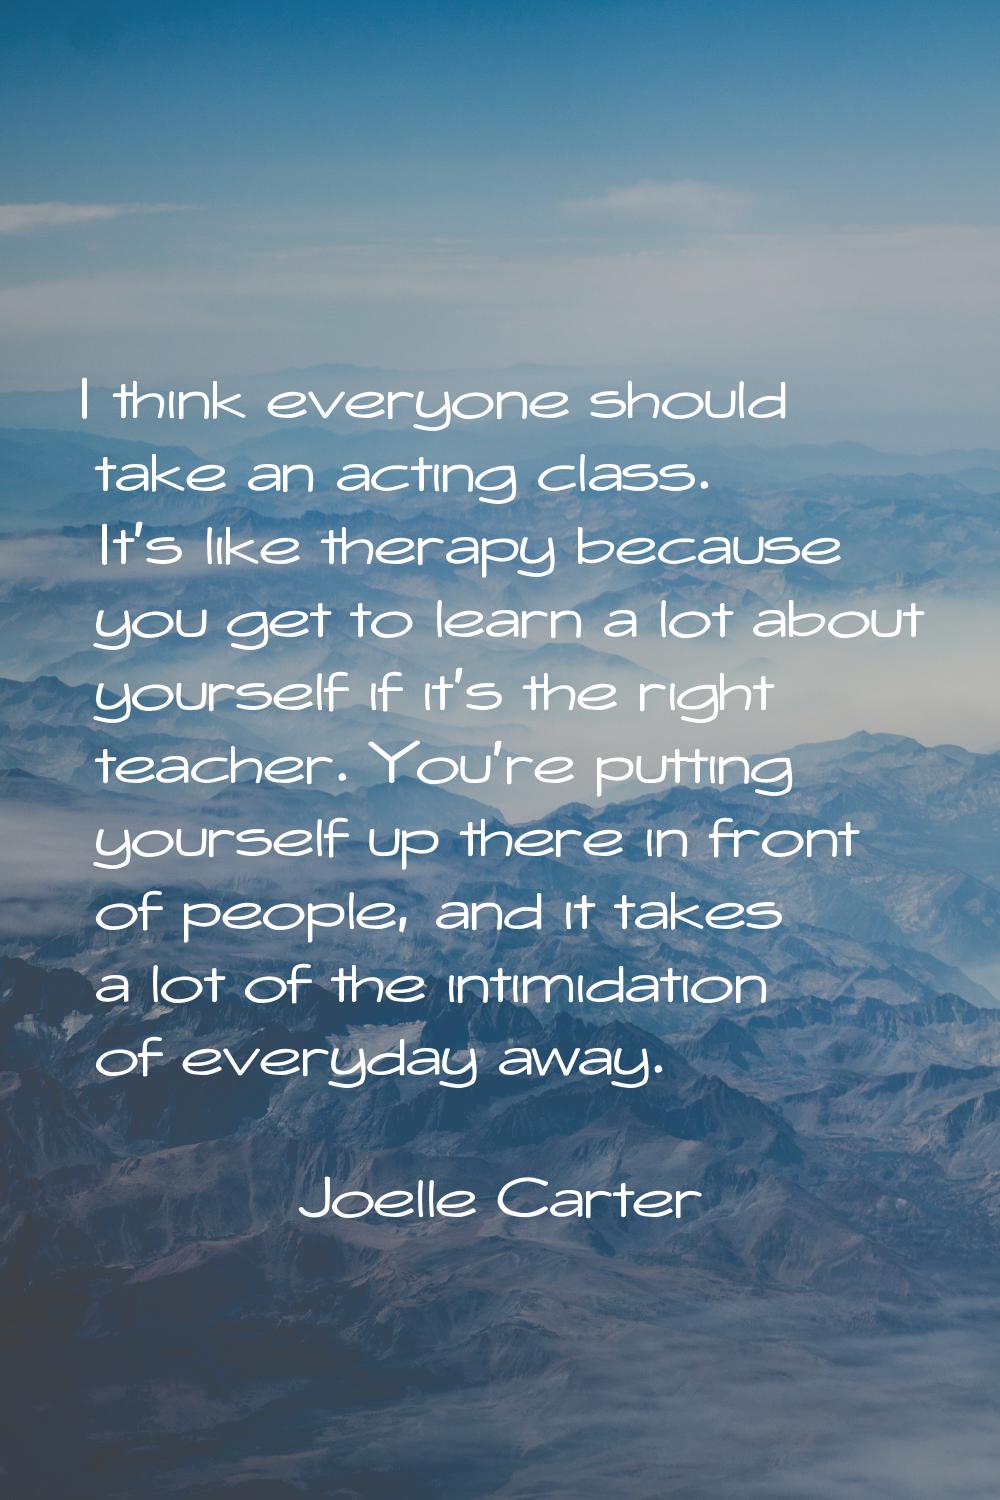 I think everyone should take an acting class. It's like therapy because you get to learn a lot abou